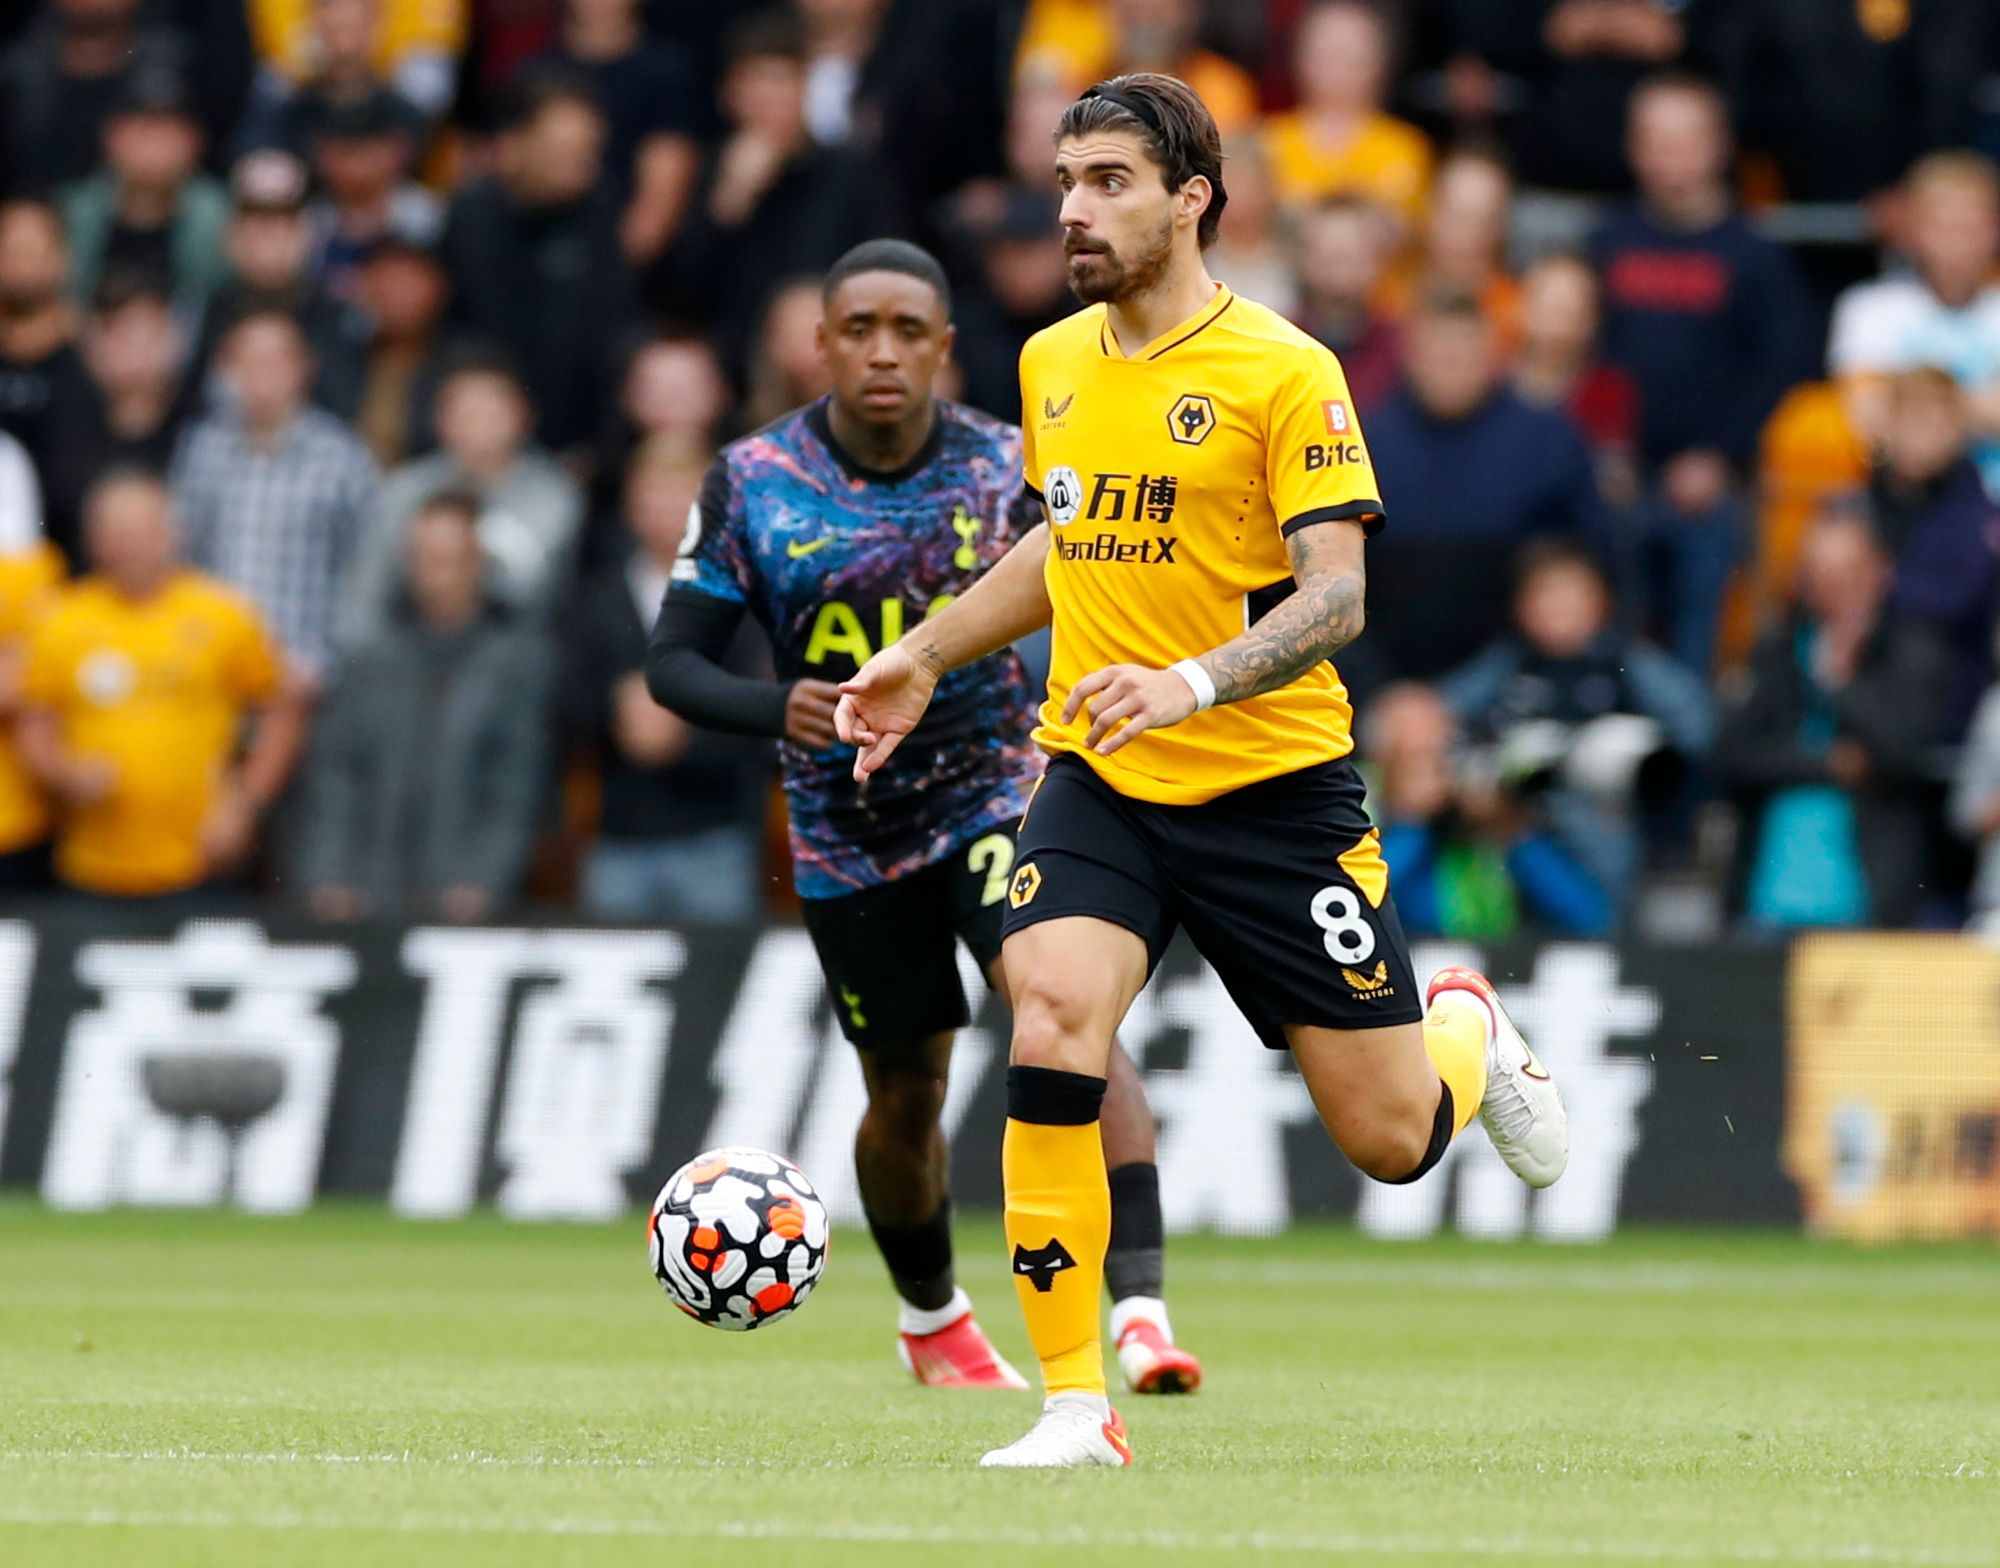 Bruno Lage, Fosun, Jeff Shi, Molineux, The Old Gold, Wolves, Wolves fans, Wolves info, Wolves latest, Wolves news, Wolves updates, WWFC, WWFC news, WWFC update, Premier League, Premier League news, Wolverhampton Wanderers, Wolves transfer news, January transfer window, Ruben Neves, 
